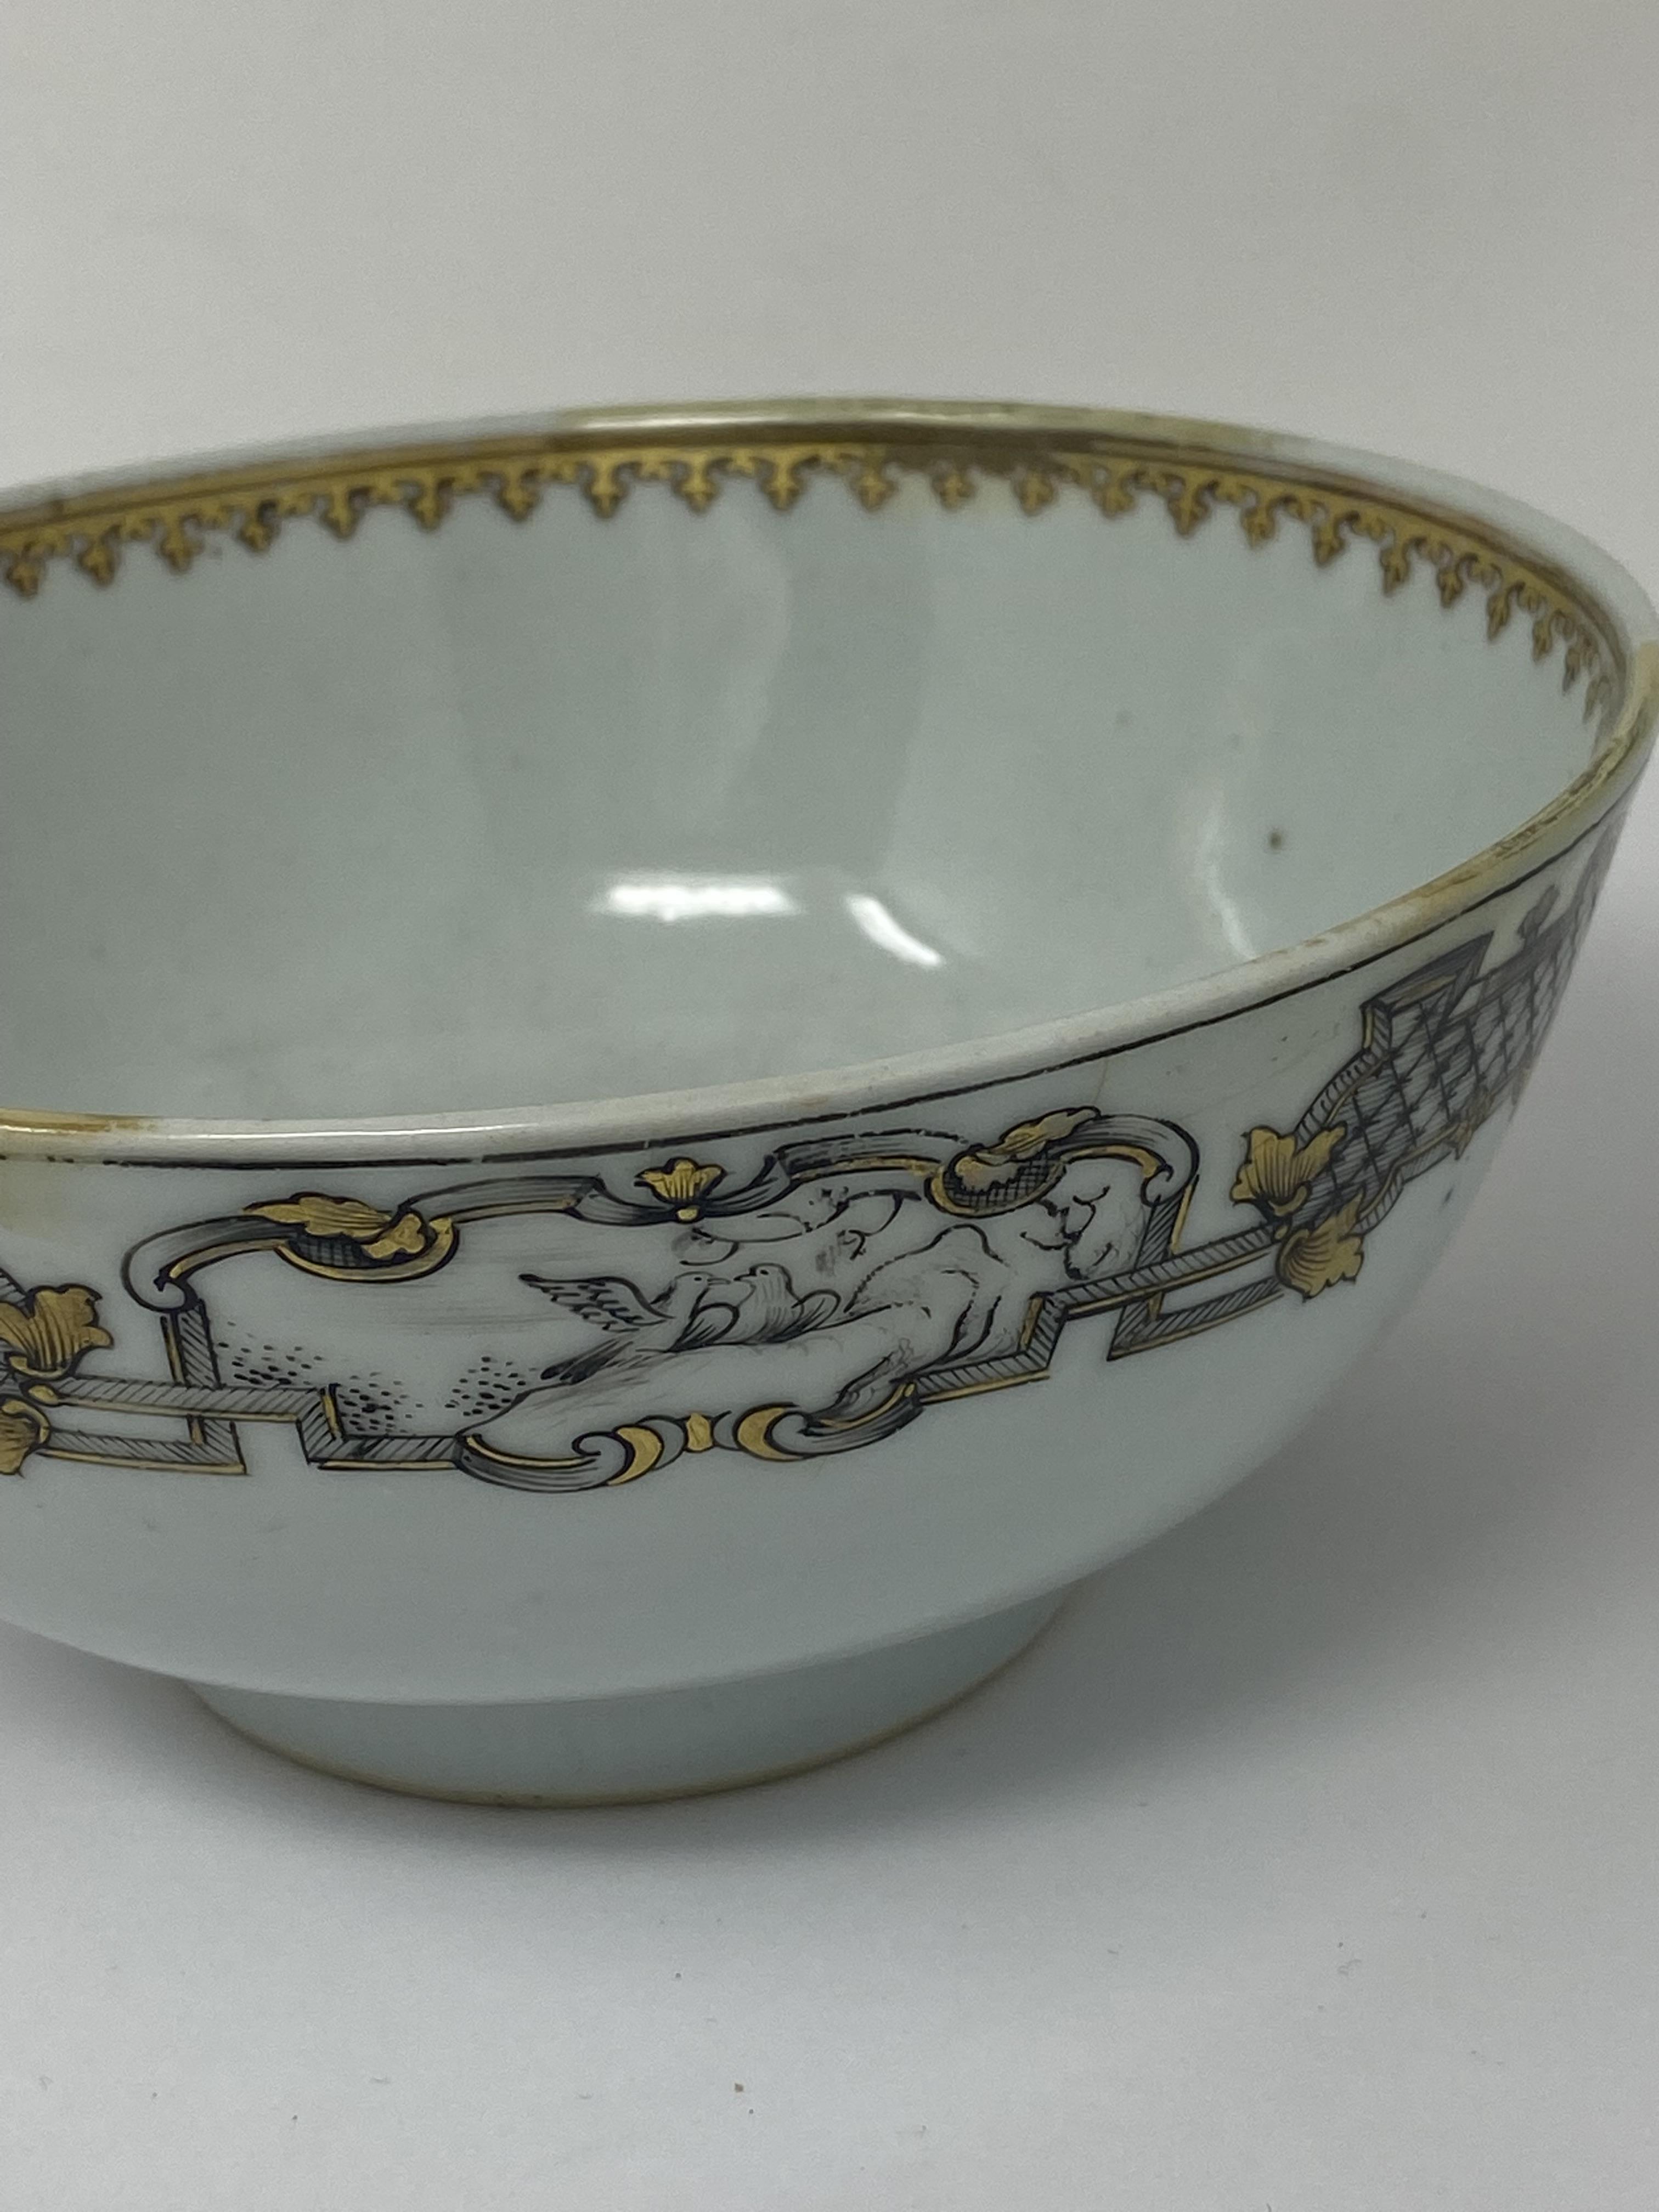 FOUR CHINESE EXPORT FAMILLE-ROSE ARMORIAL PORCELAINS, 18TH CENTURY - Image 7 of 13